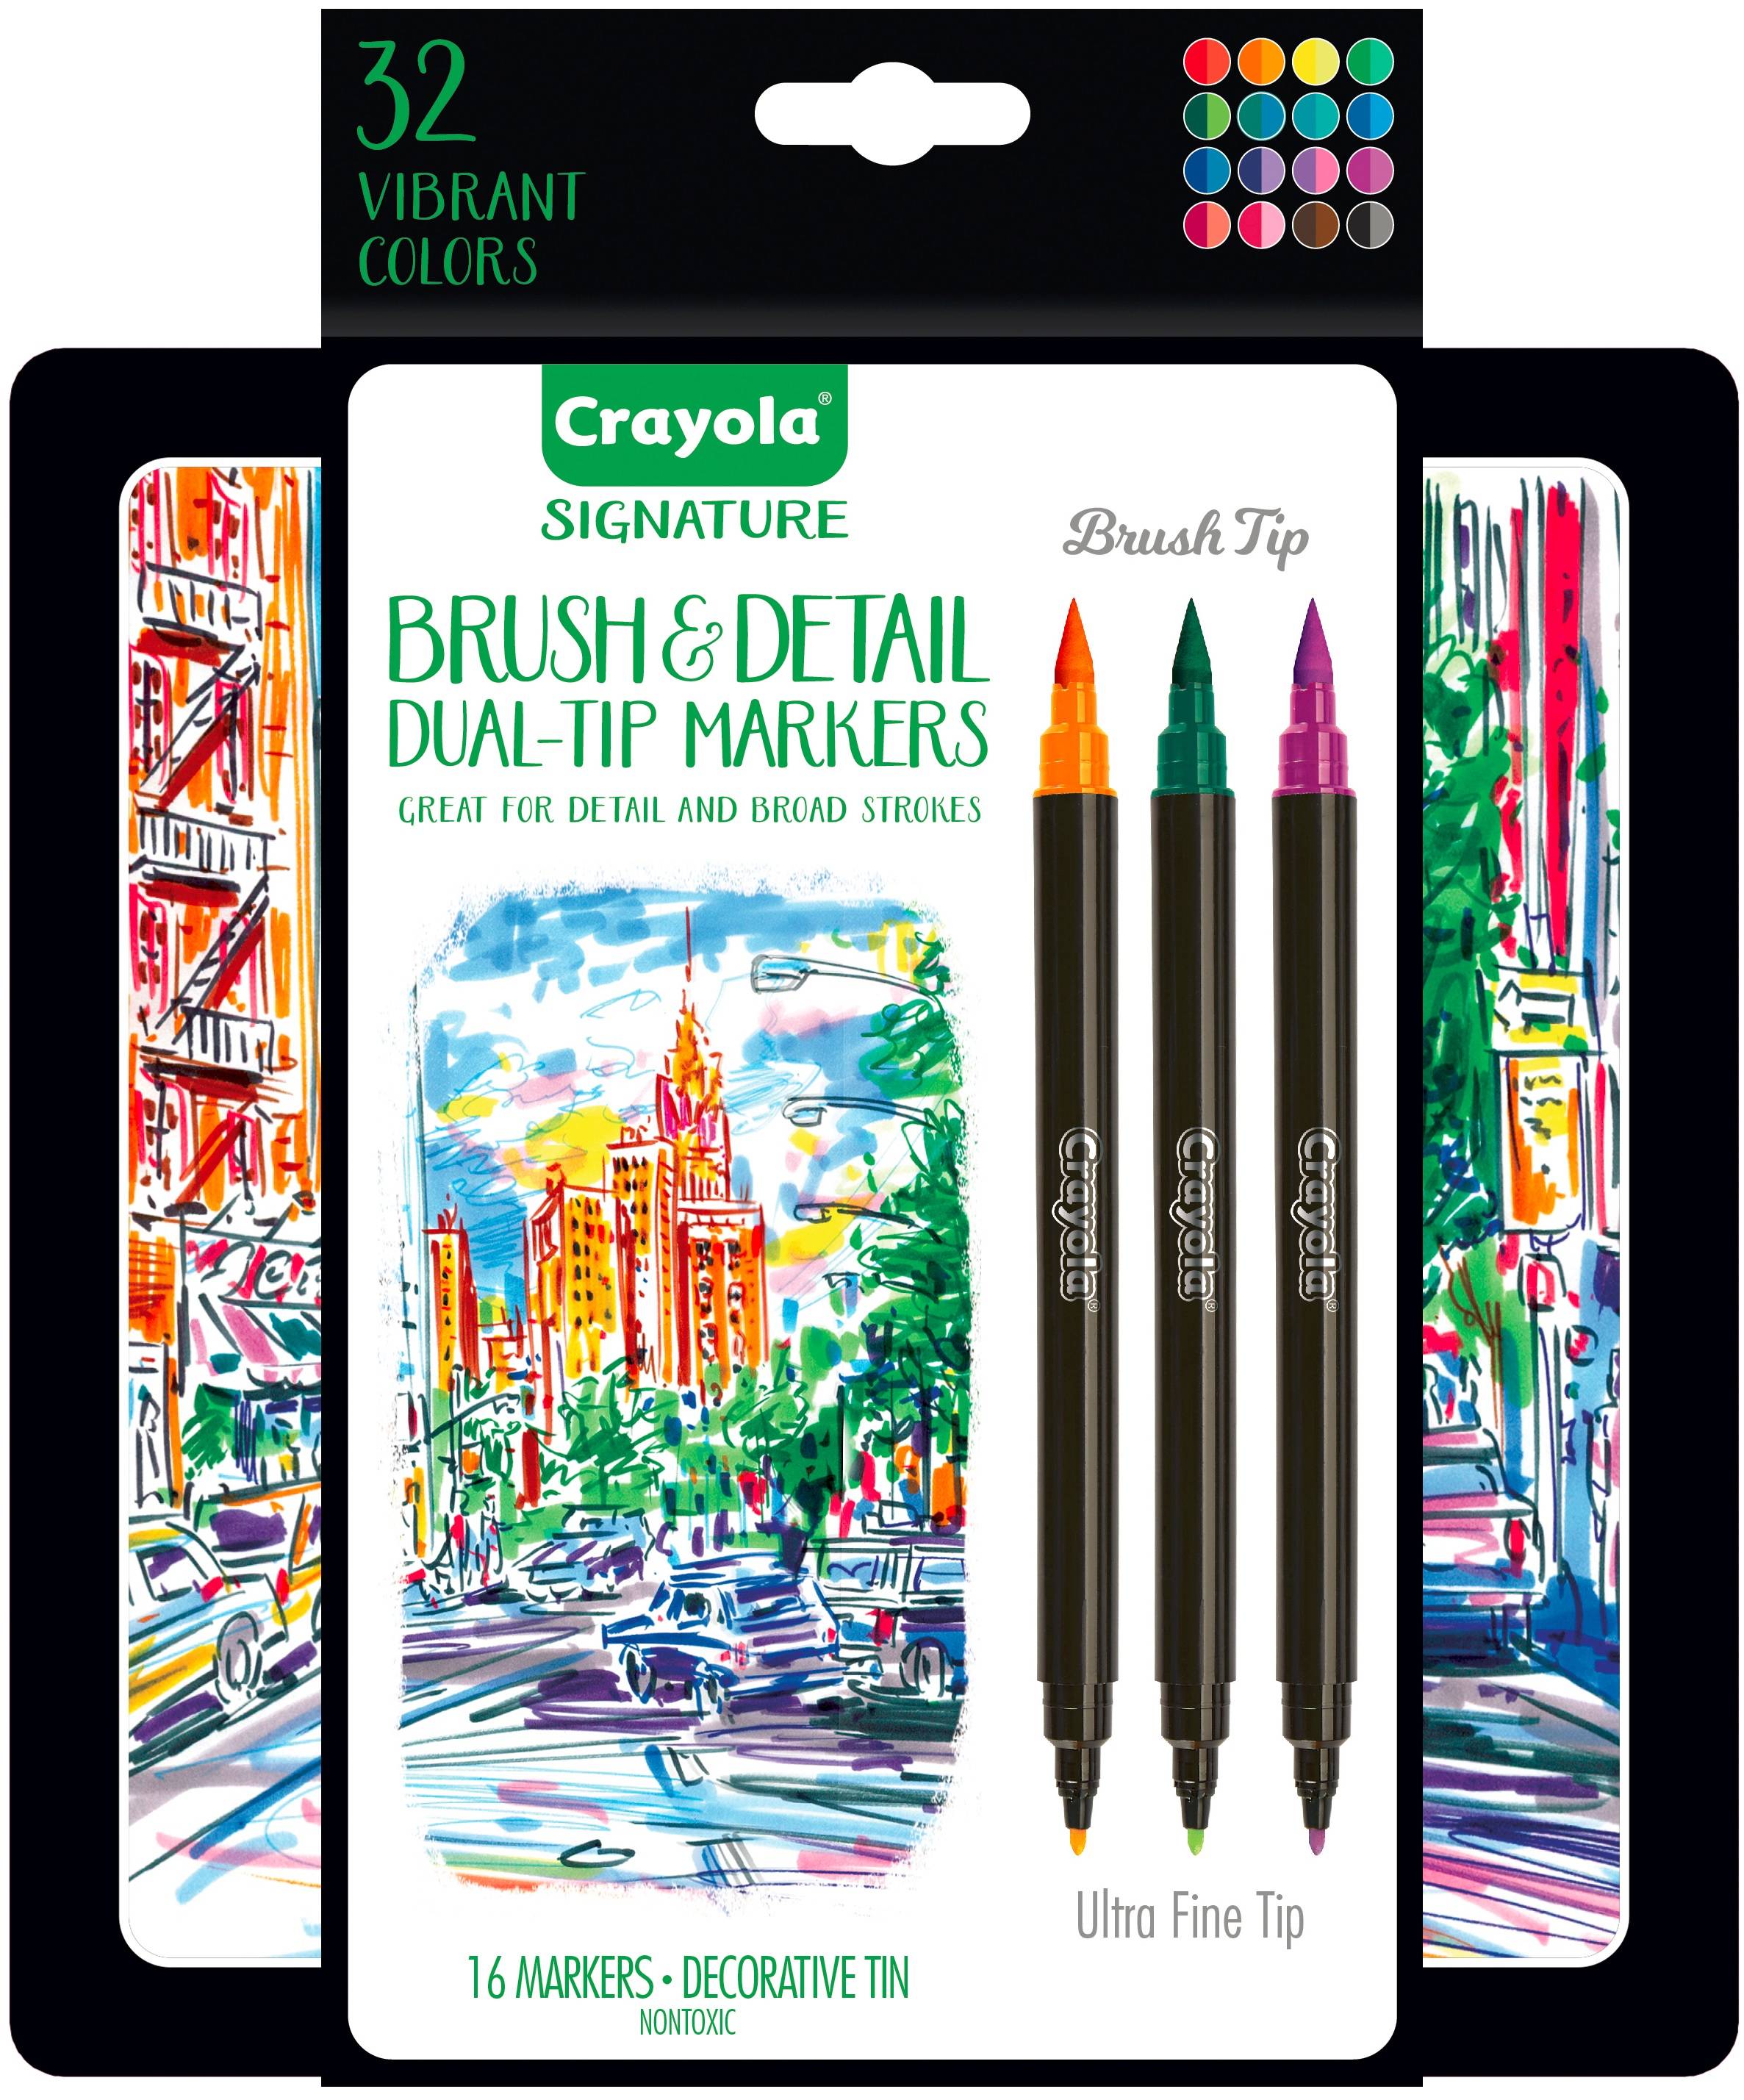 Crayola Signature Brush & Detail Dual-Tip Markers, 16 Ct, Art Supplies for Teens, Adult Coloring - image 1 of 5